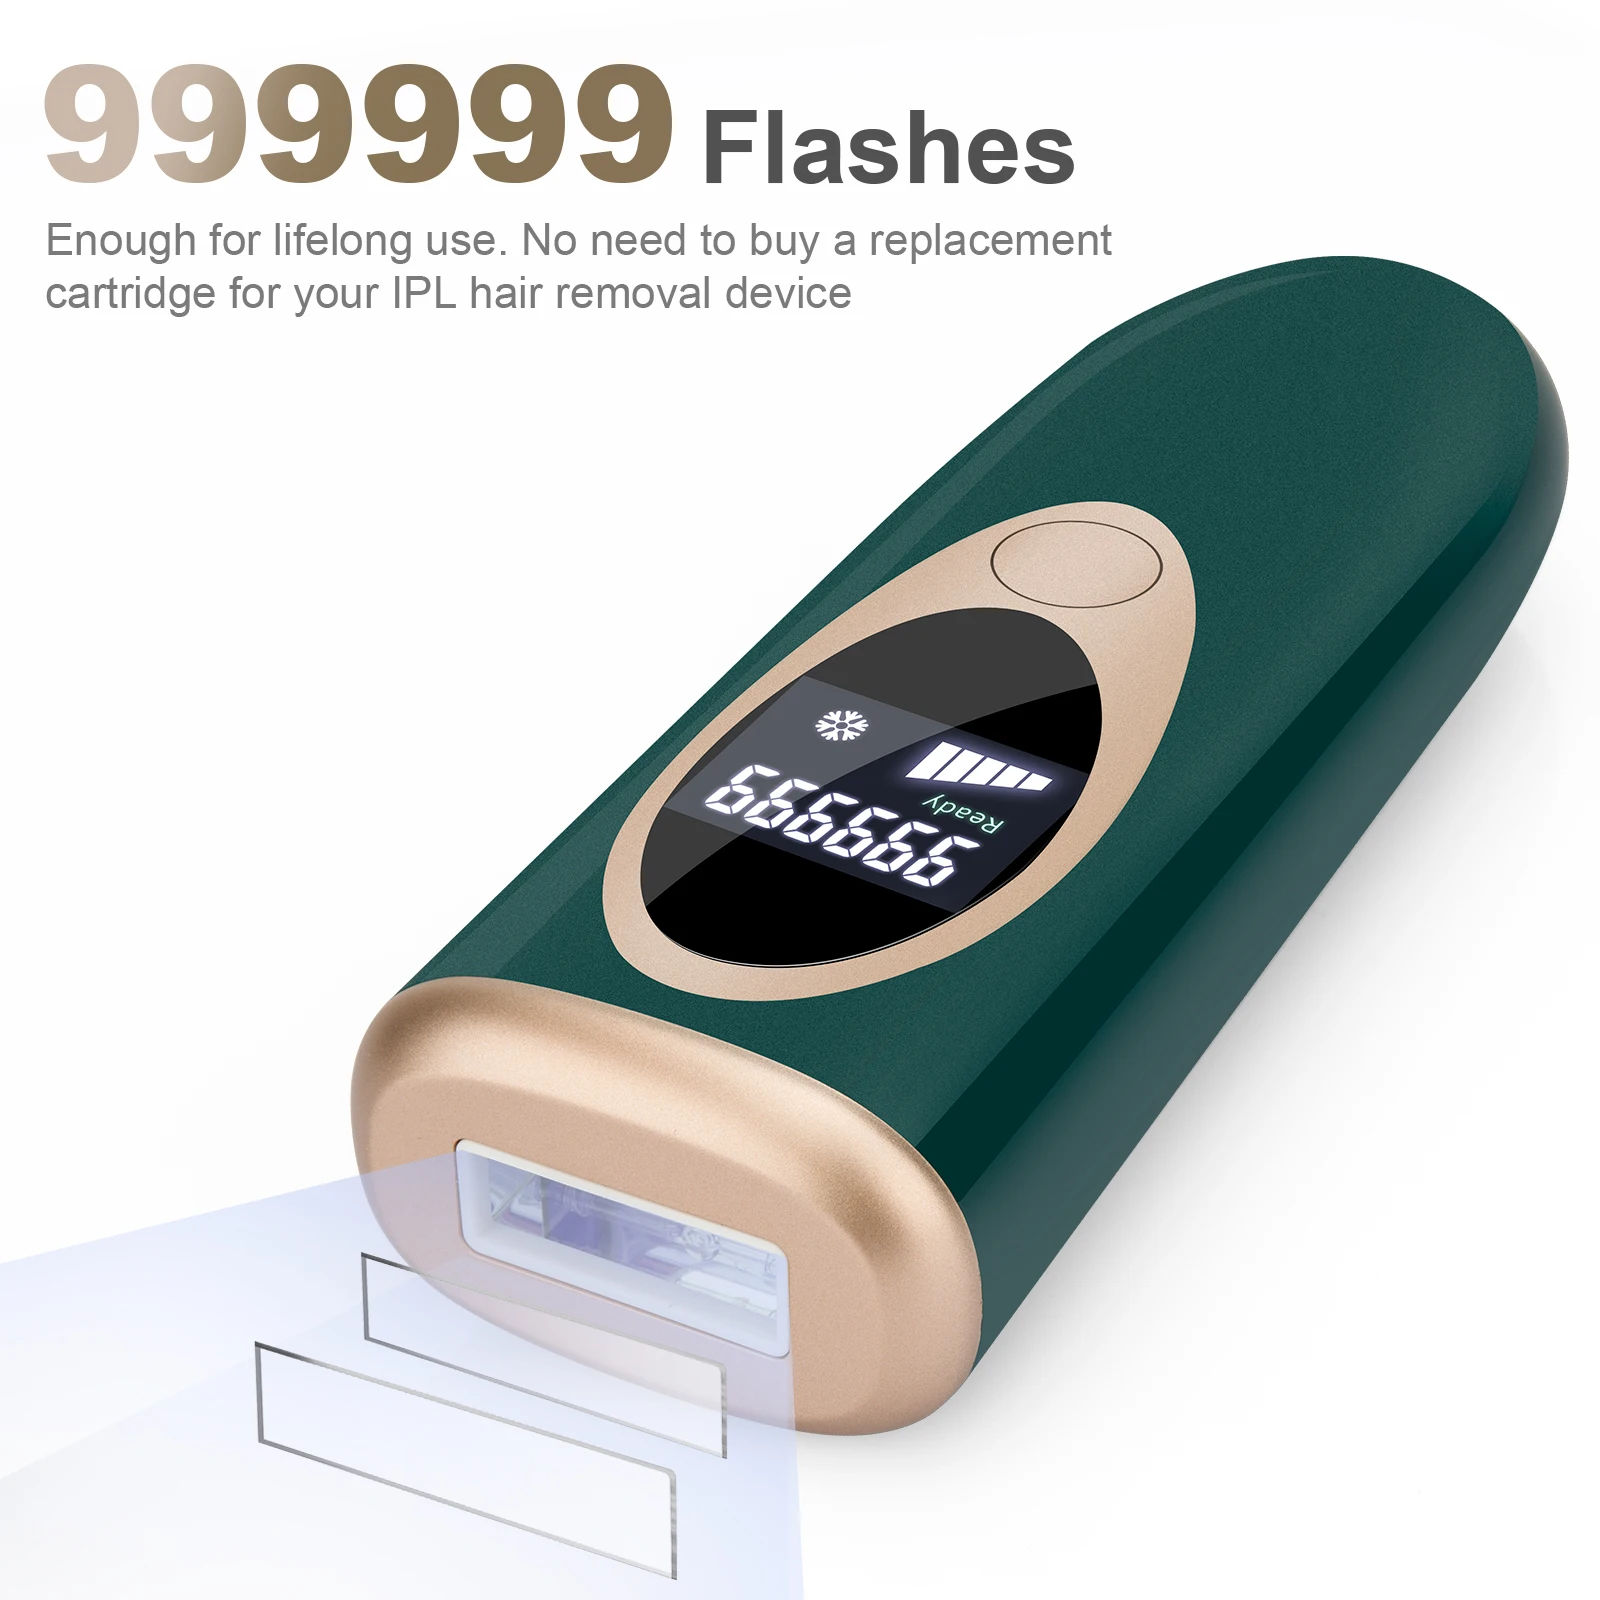 Women Electric Epilator 999999 Times Flash Laser Epilator Permanently Remove And Smooth Skin Painless Apply To Face And Body